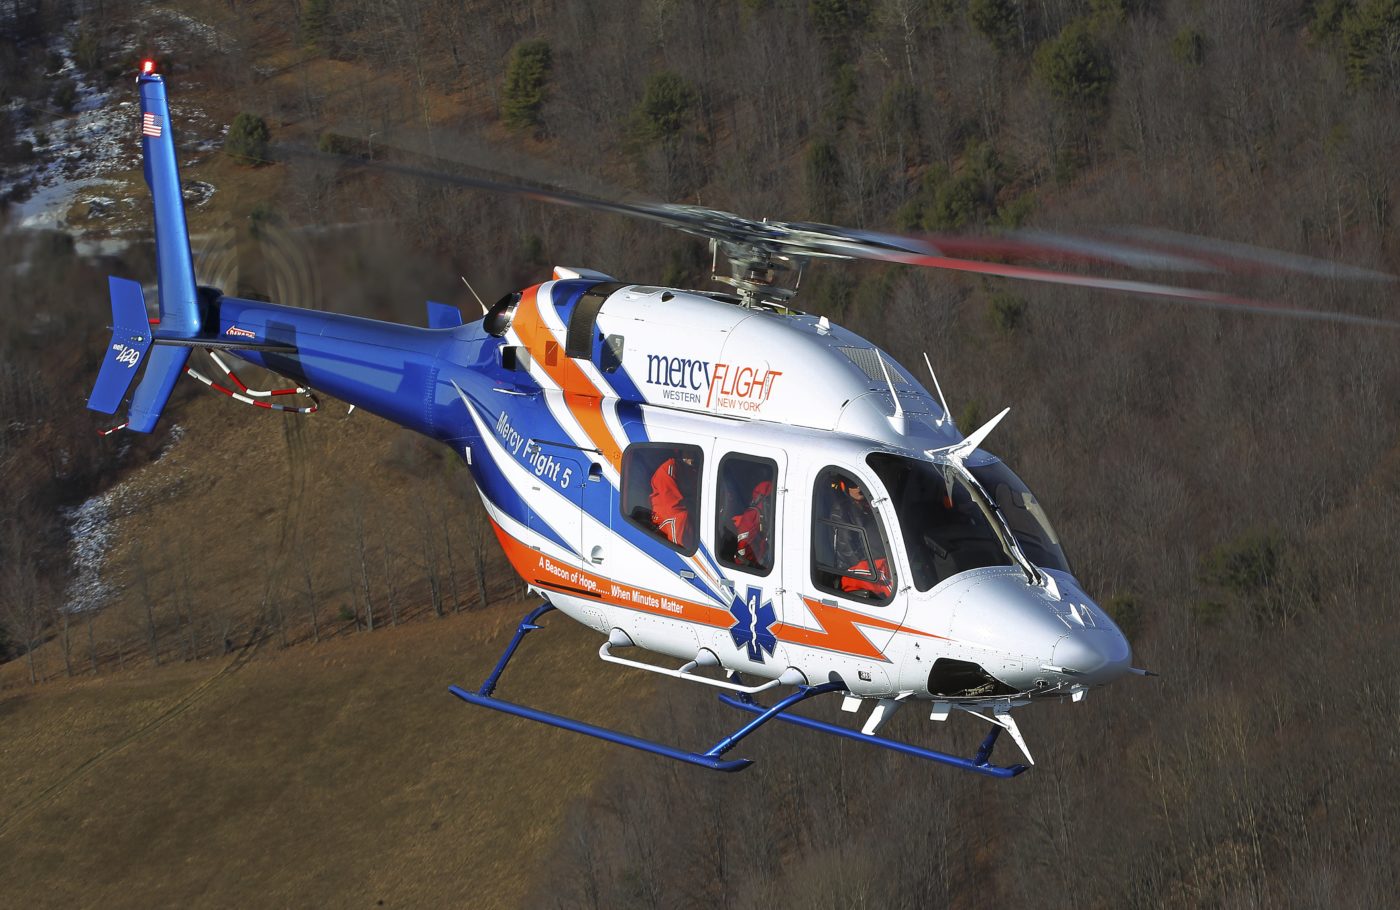 Mercy Flight is now one of the largest Bell 429 helicopter emergency medical service operators in North America.